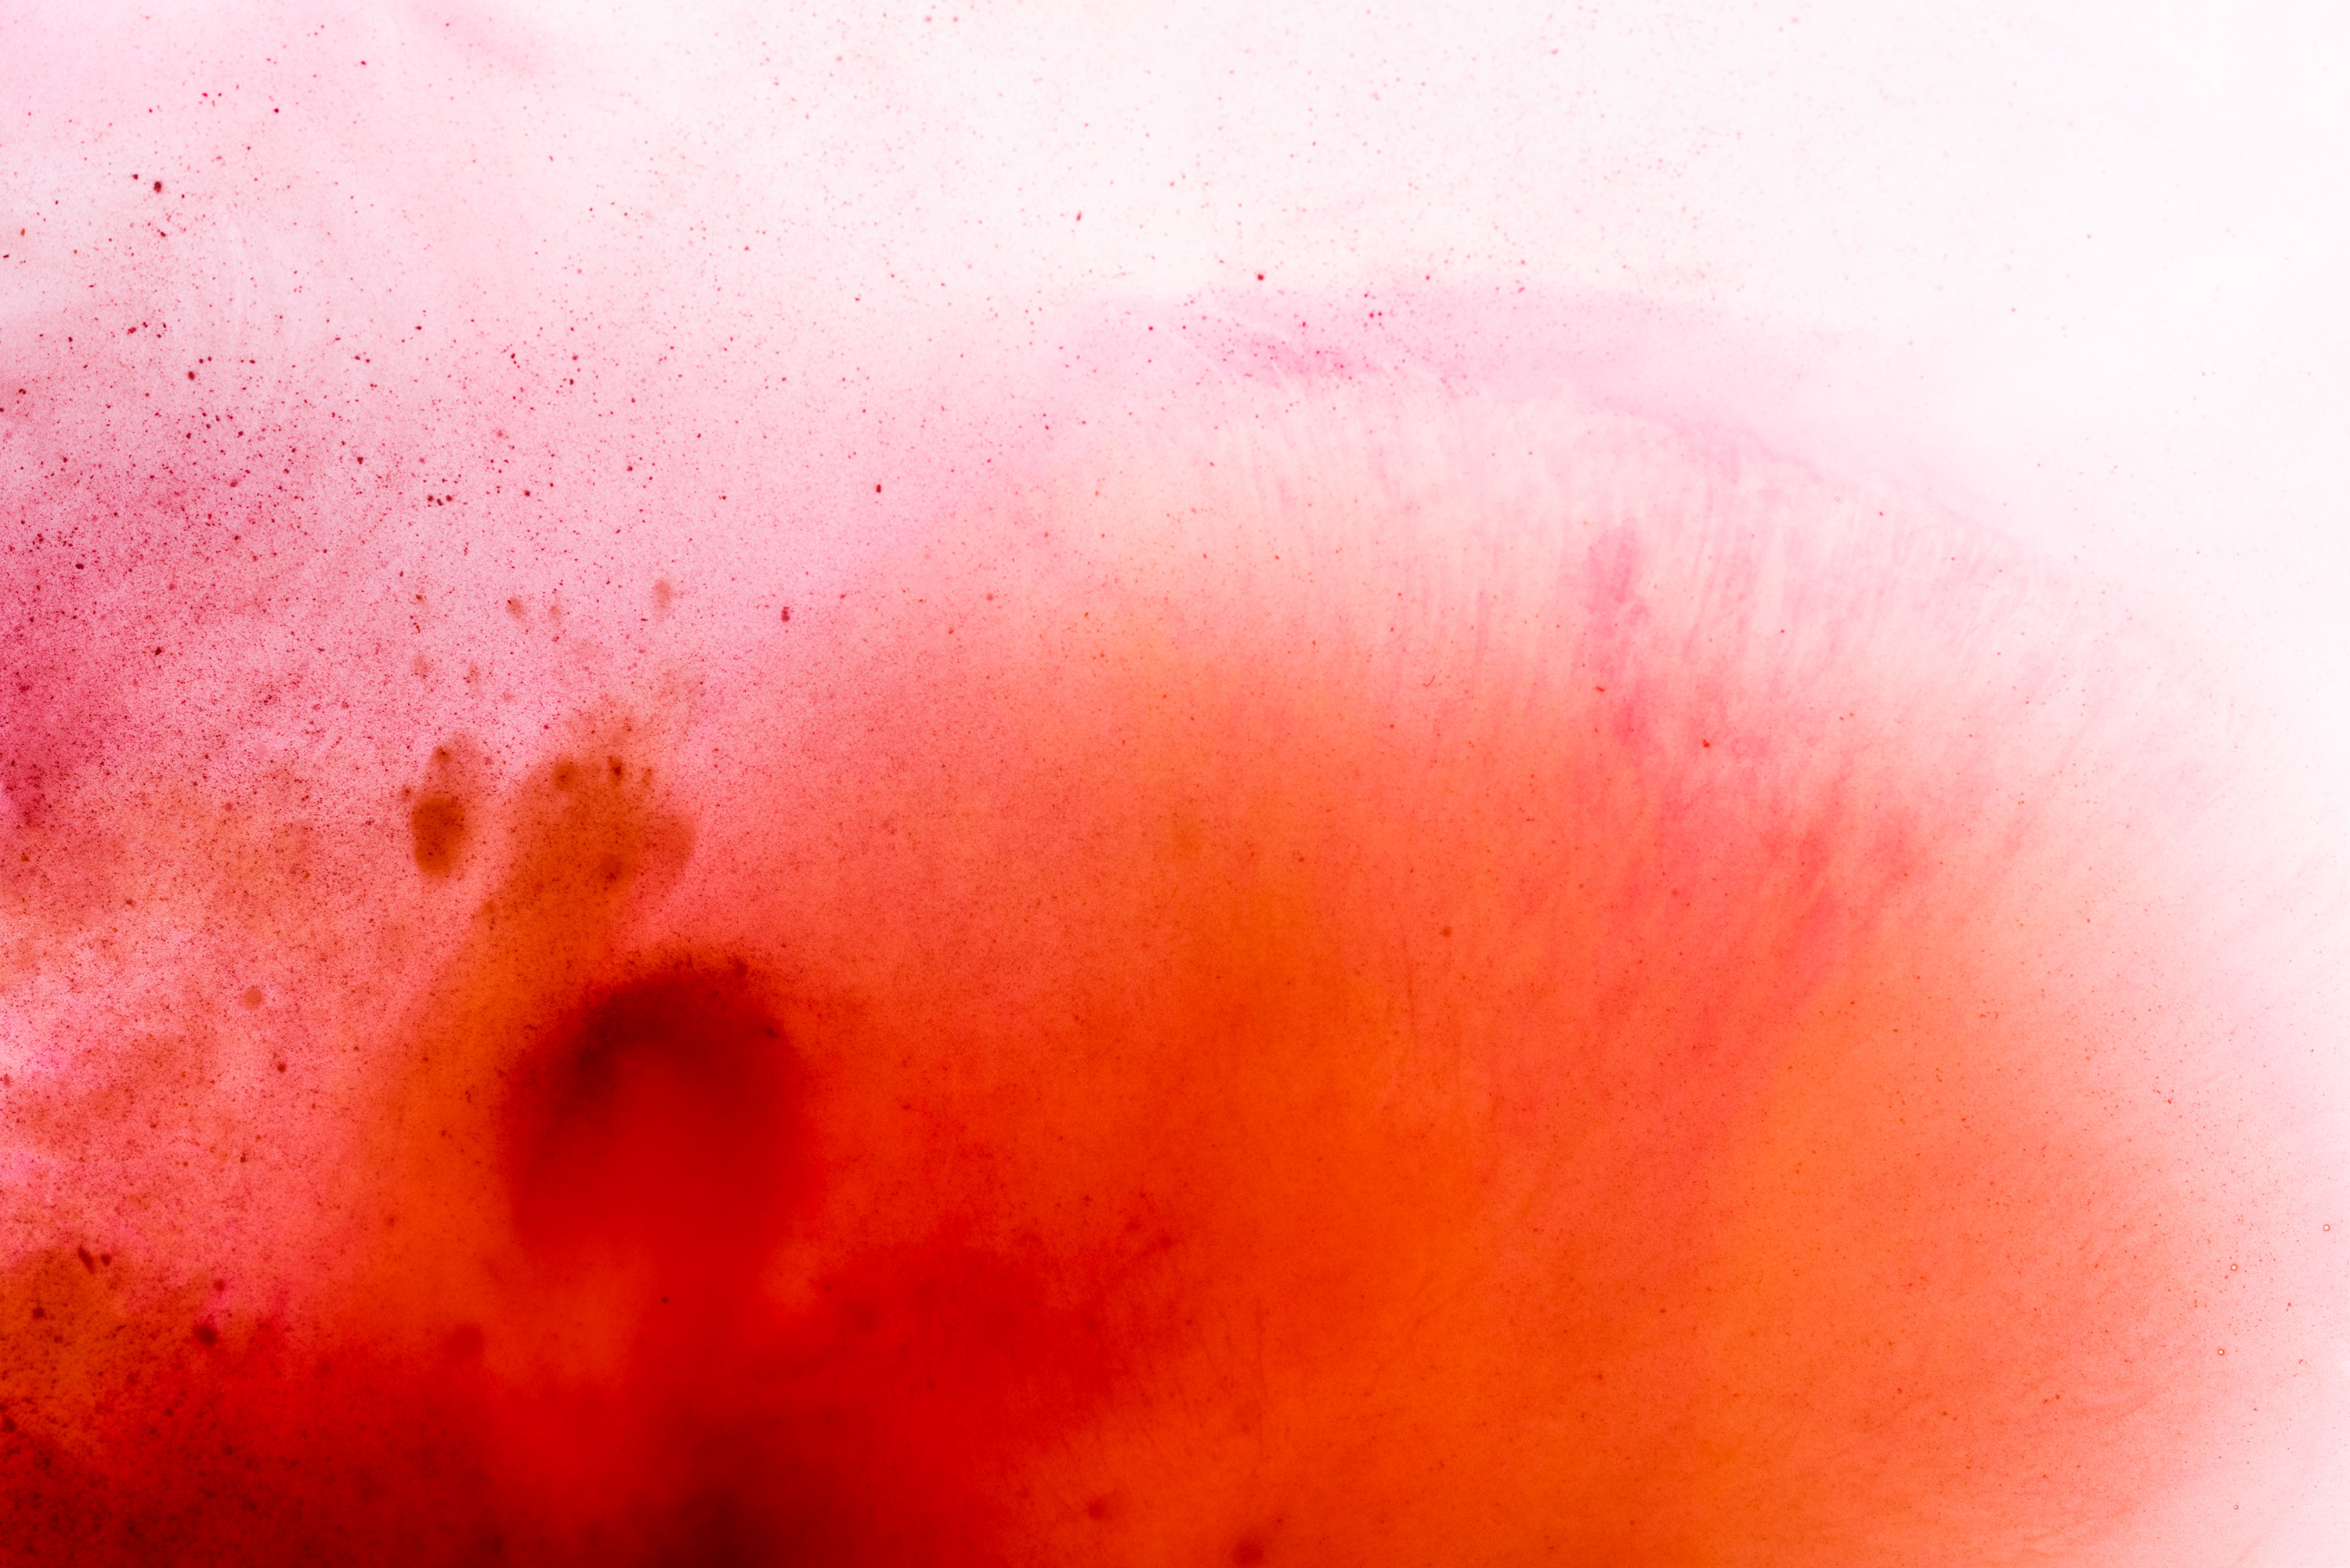 Minimal art photography made of orange and red watercolour. Image by Jennifer Esseiva.